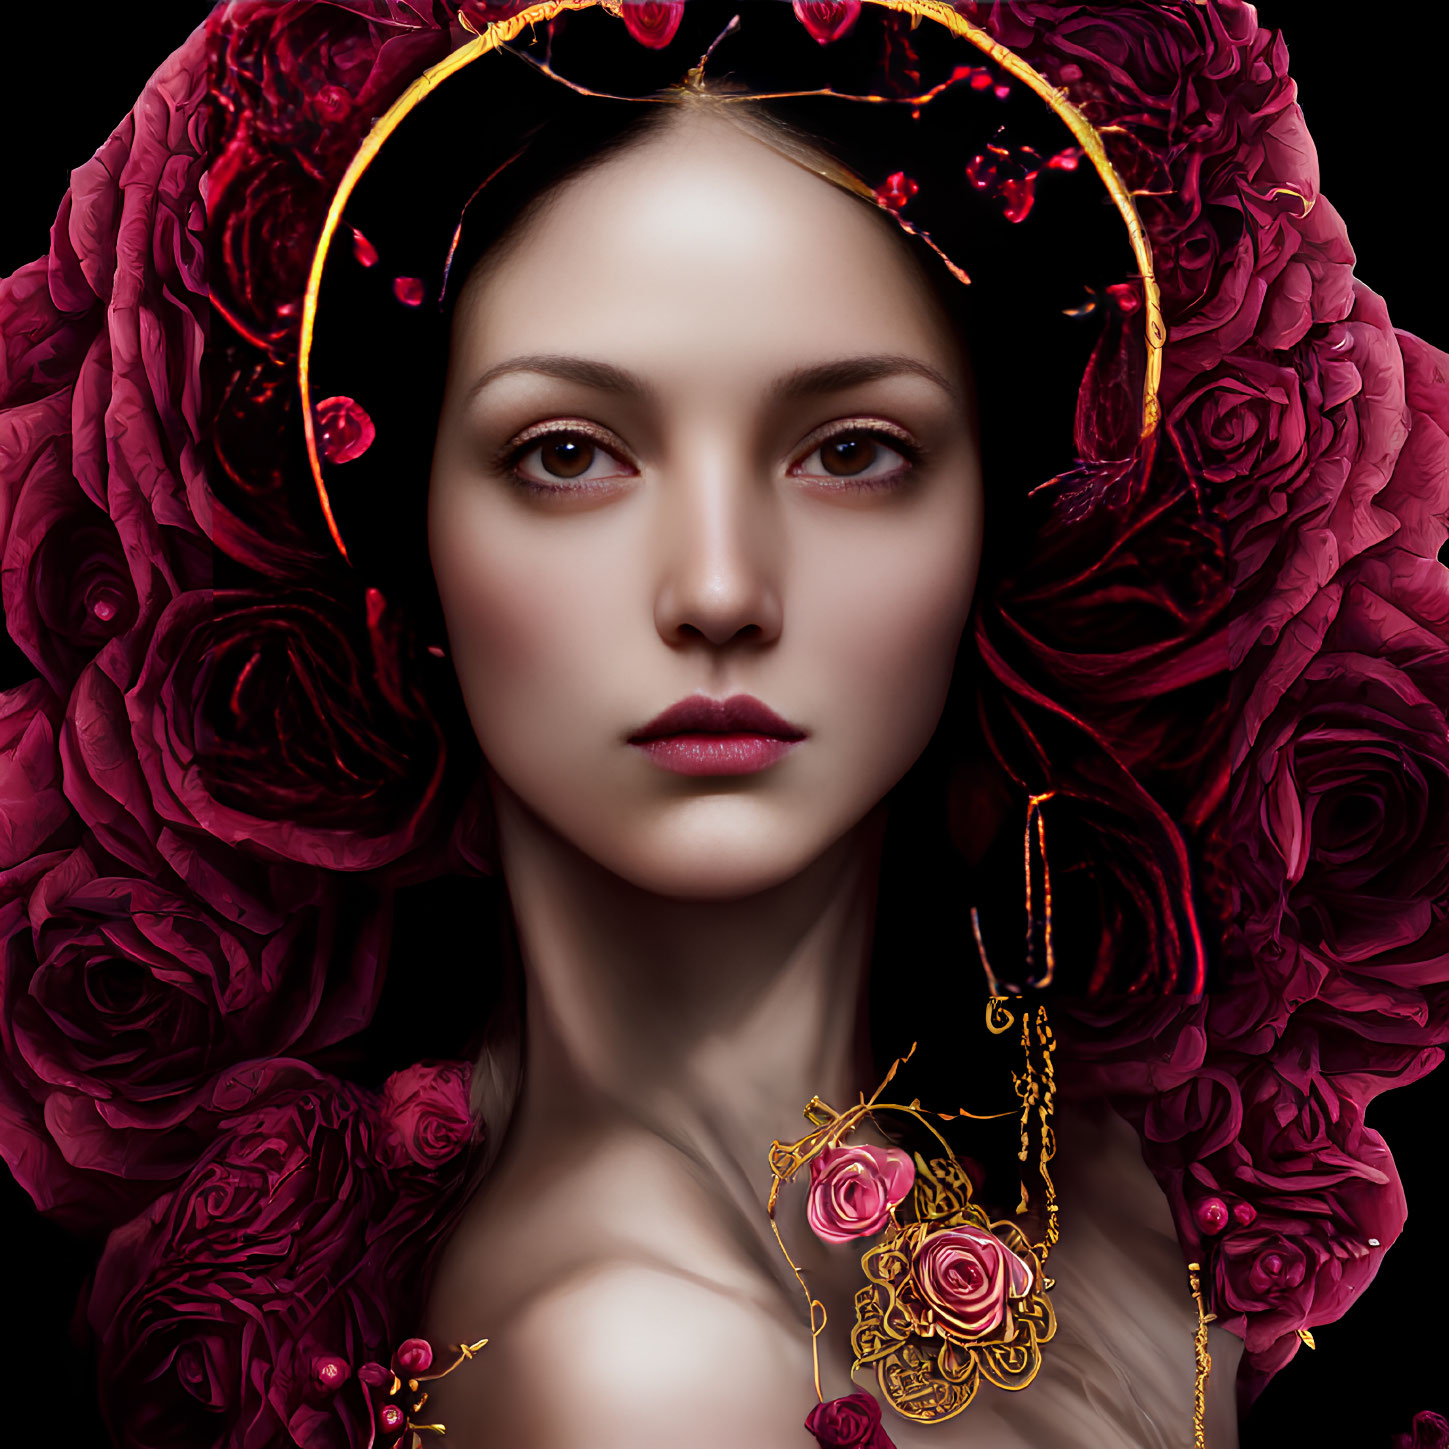 Serene woman with golden halo and rose jewelry among dark red roses